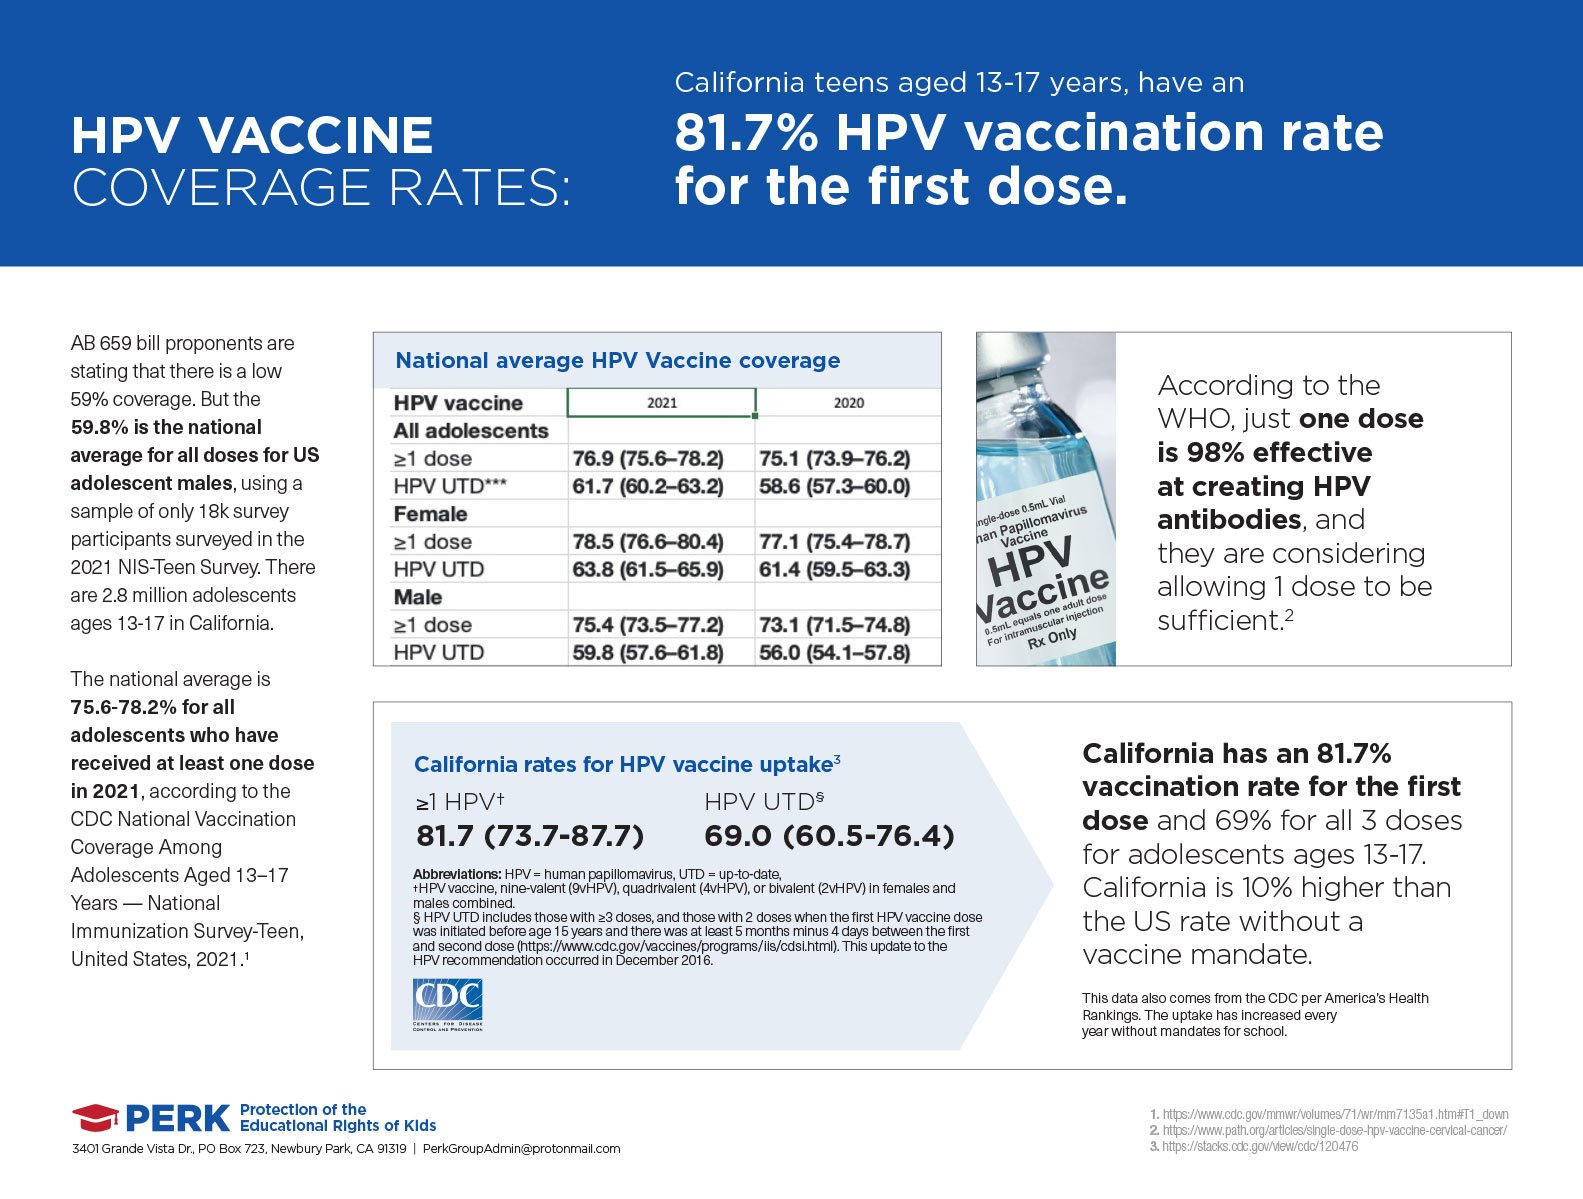 HPV-Vaccination-Stats-Overview-1.jpg